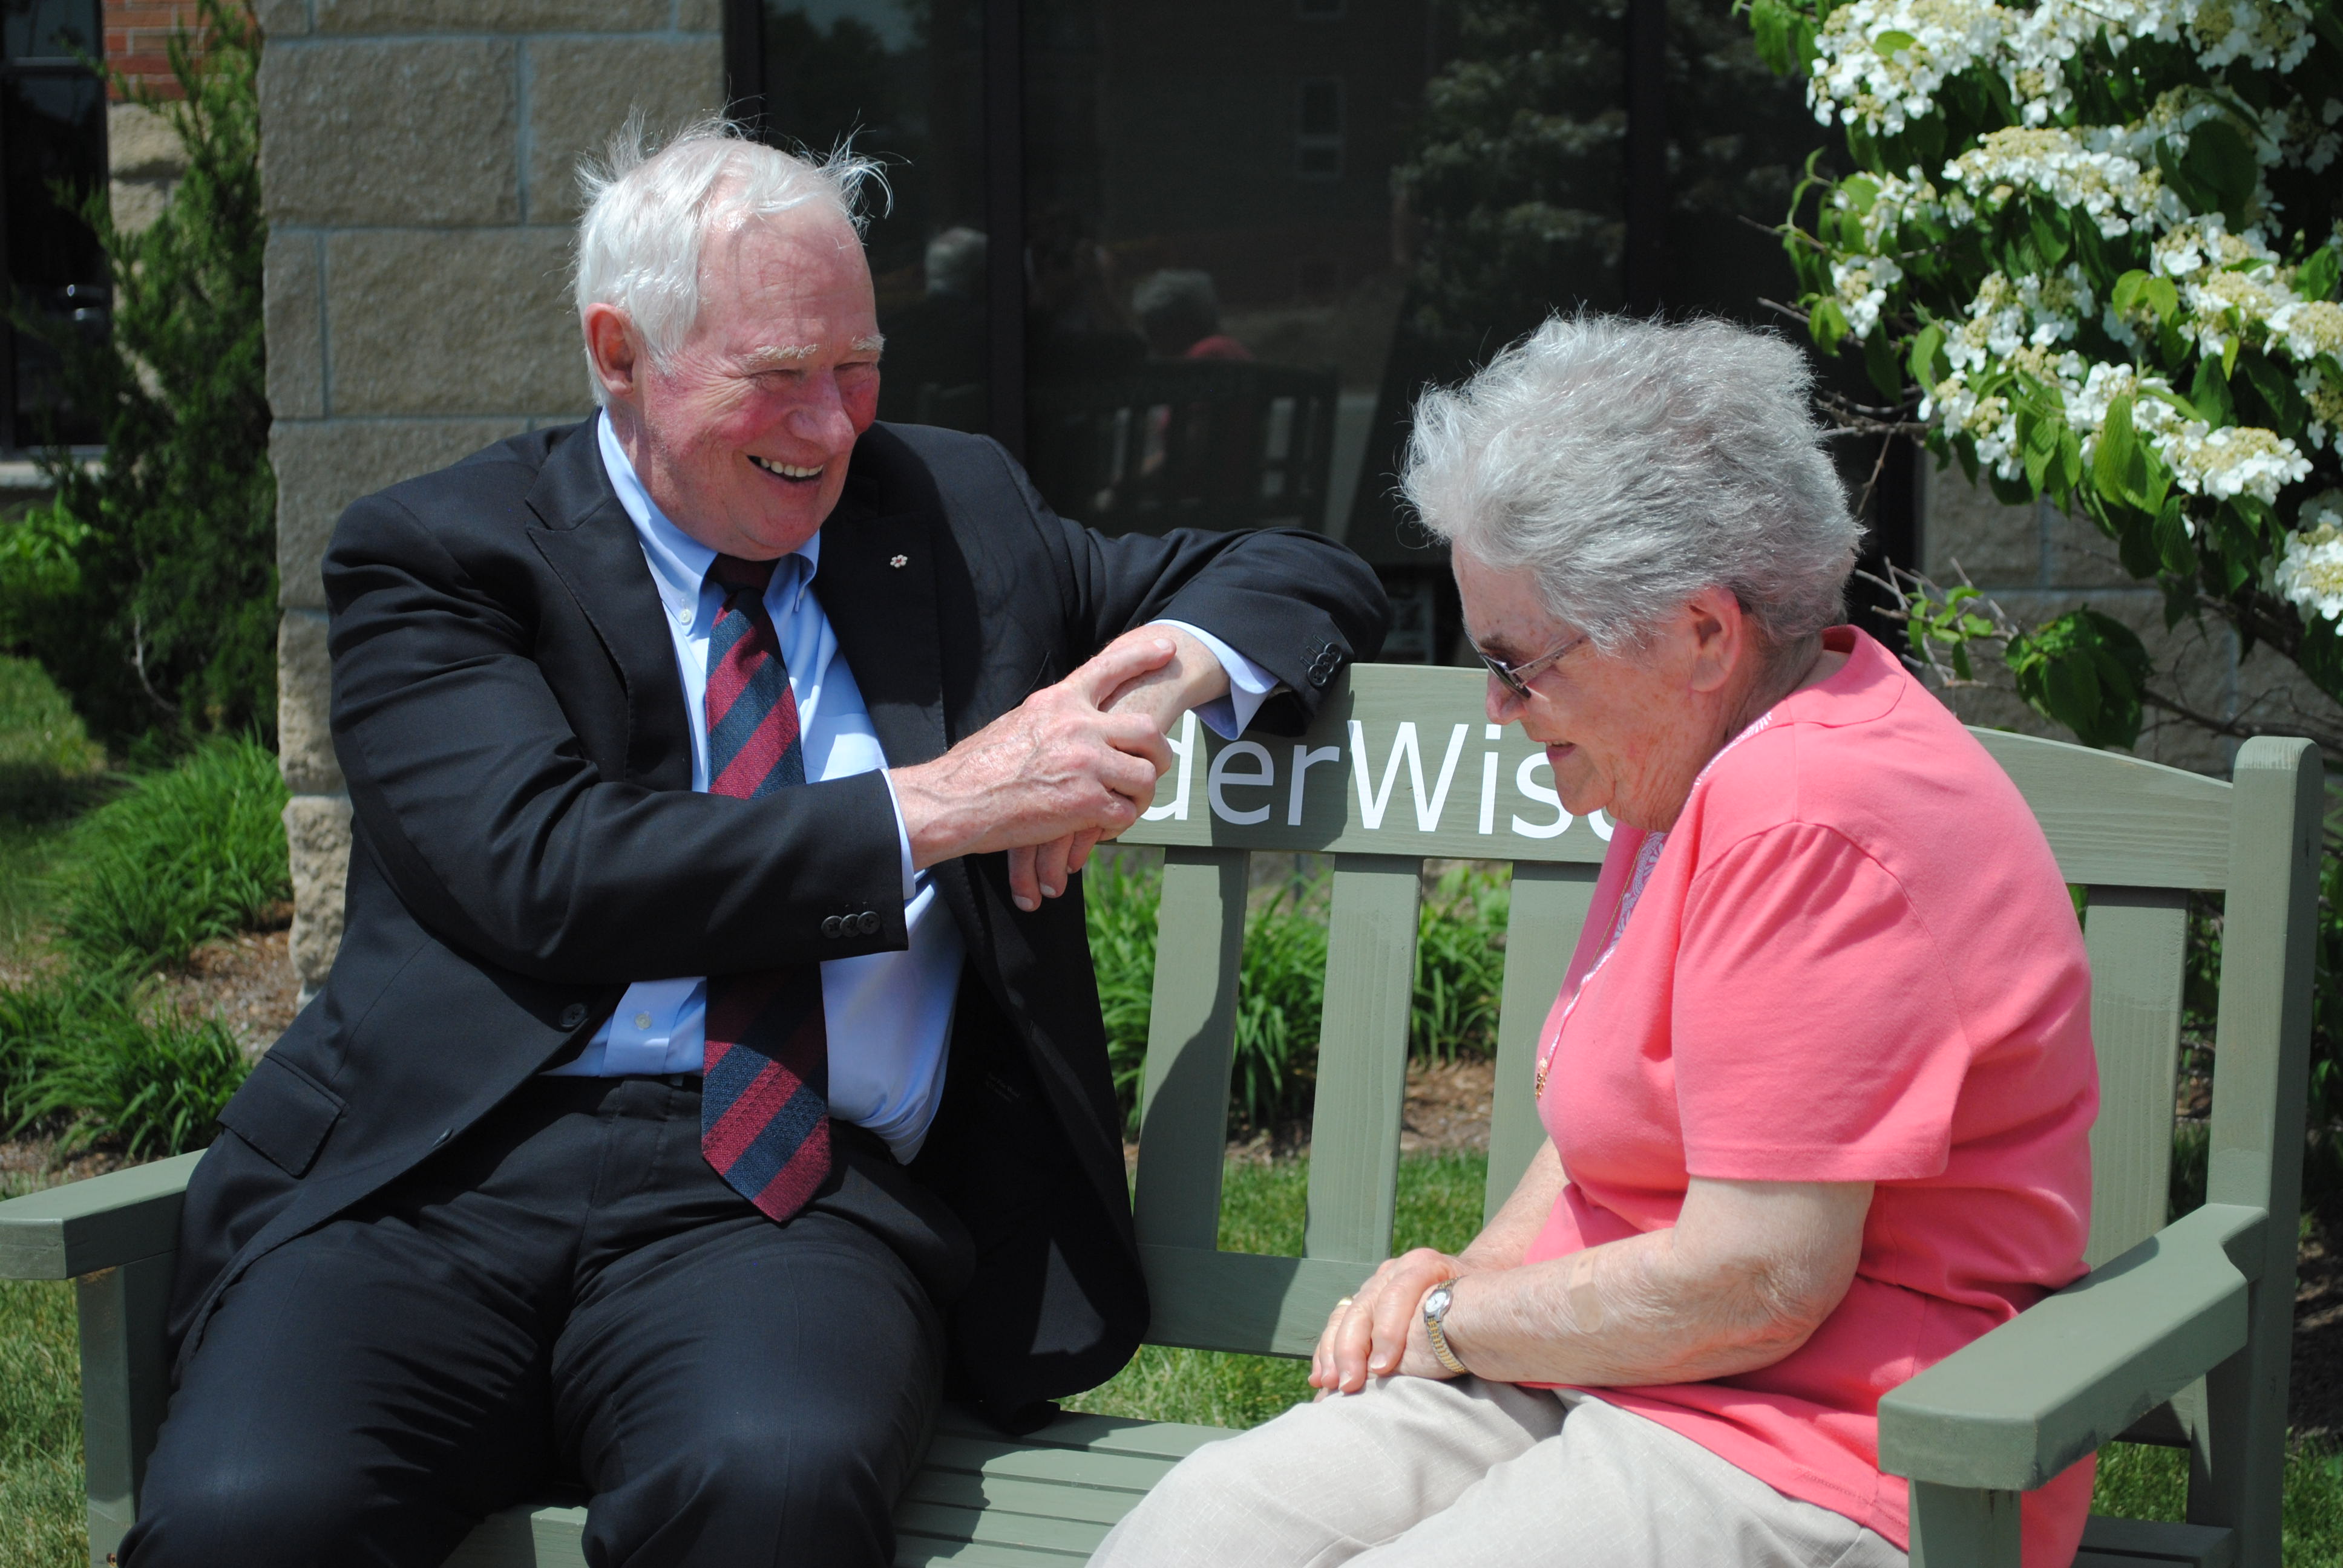 The Right Honourable David Johnston says #ElderWidsom is a way to cherish our teachers.